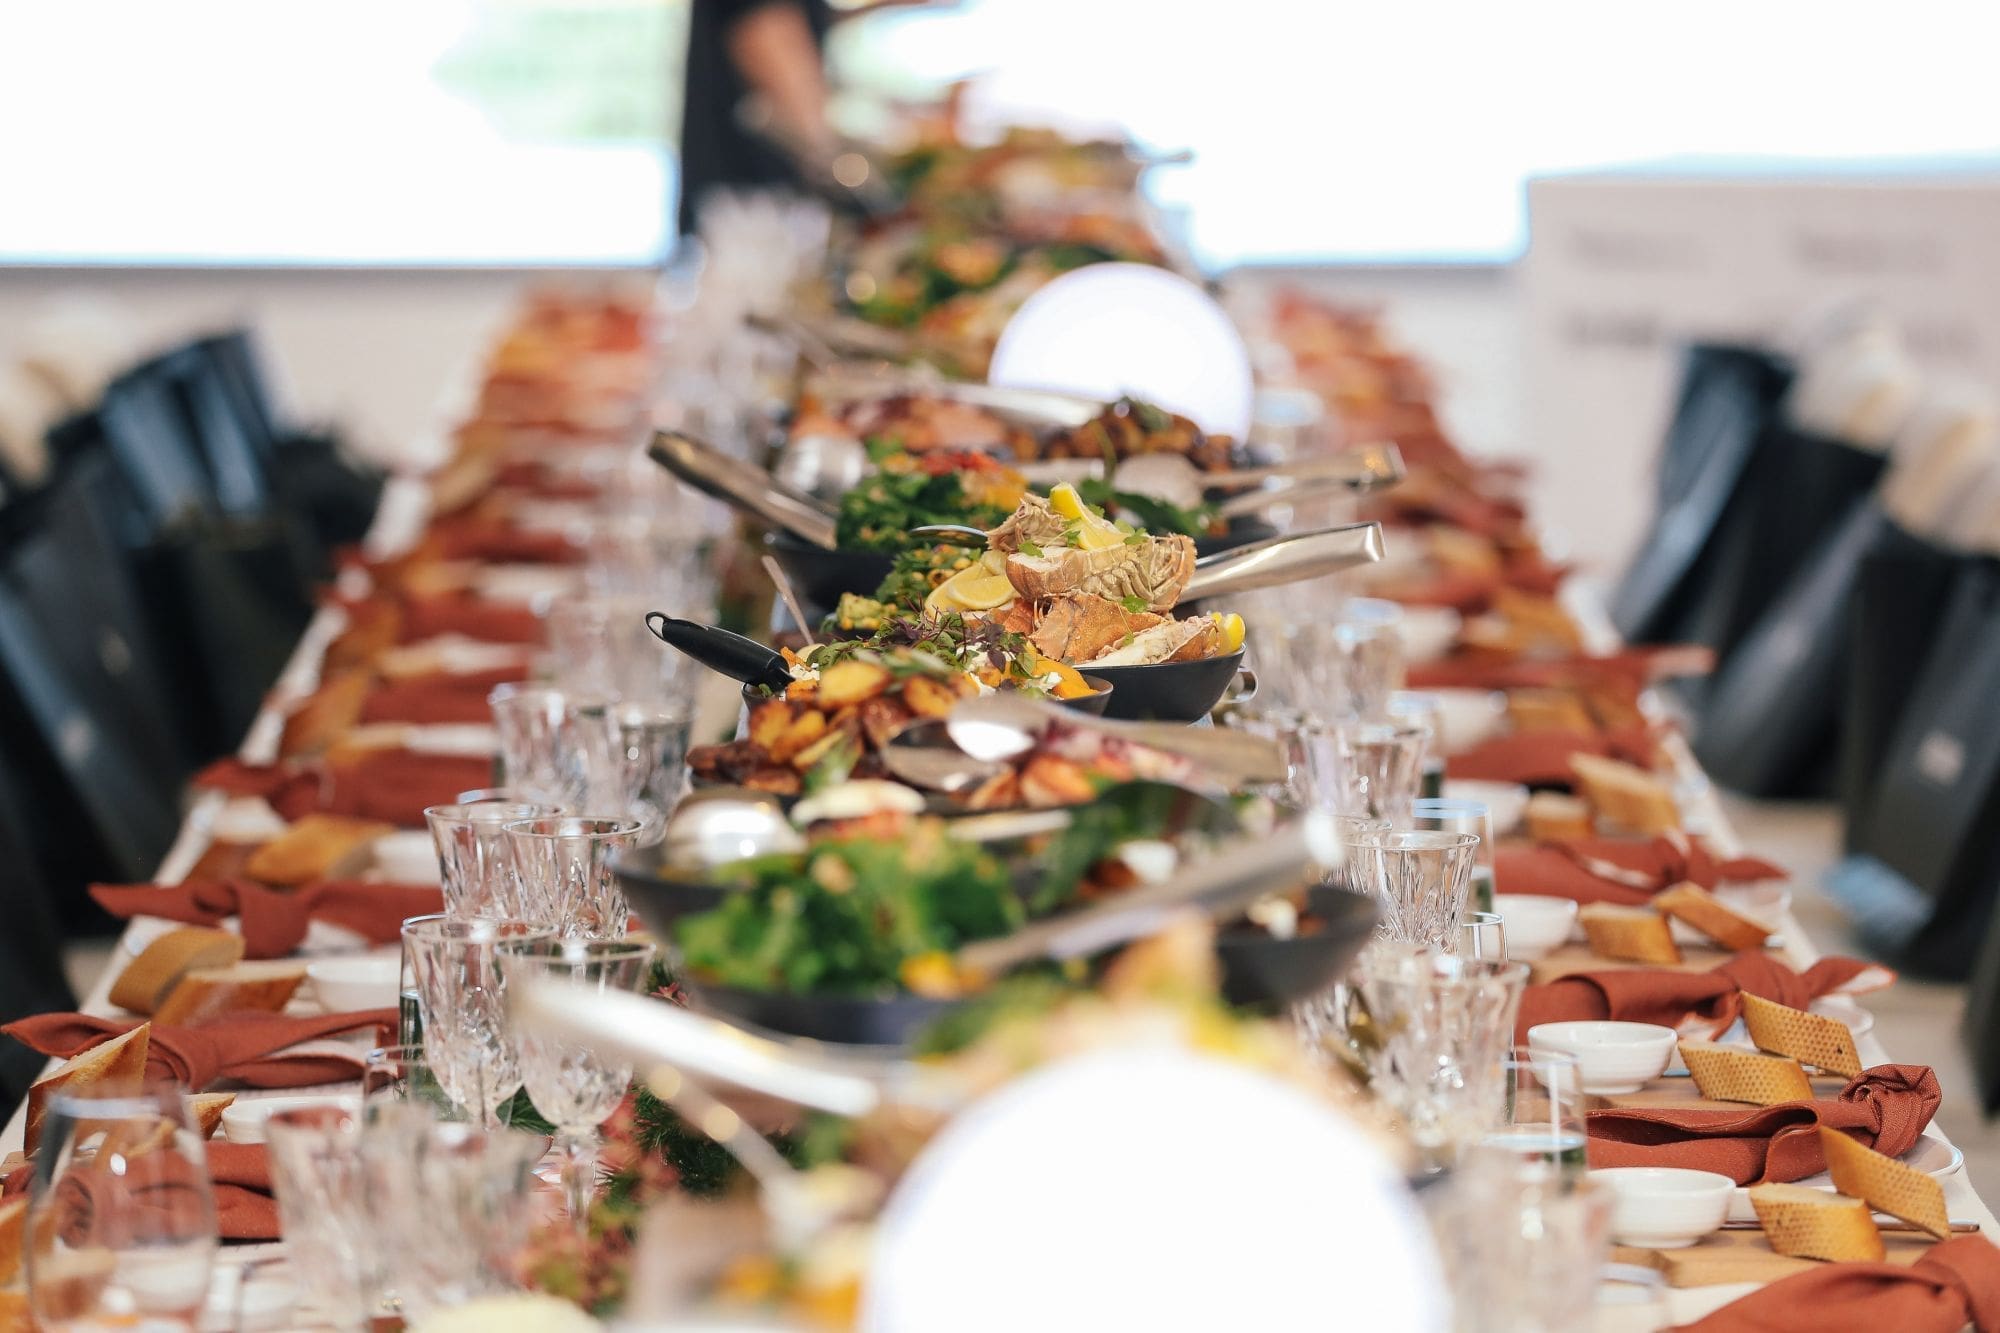 corporate buffet catering; corporate catering Sydney; corporate caterer Sydney; Sydney corporate catering